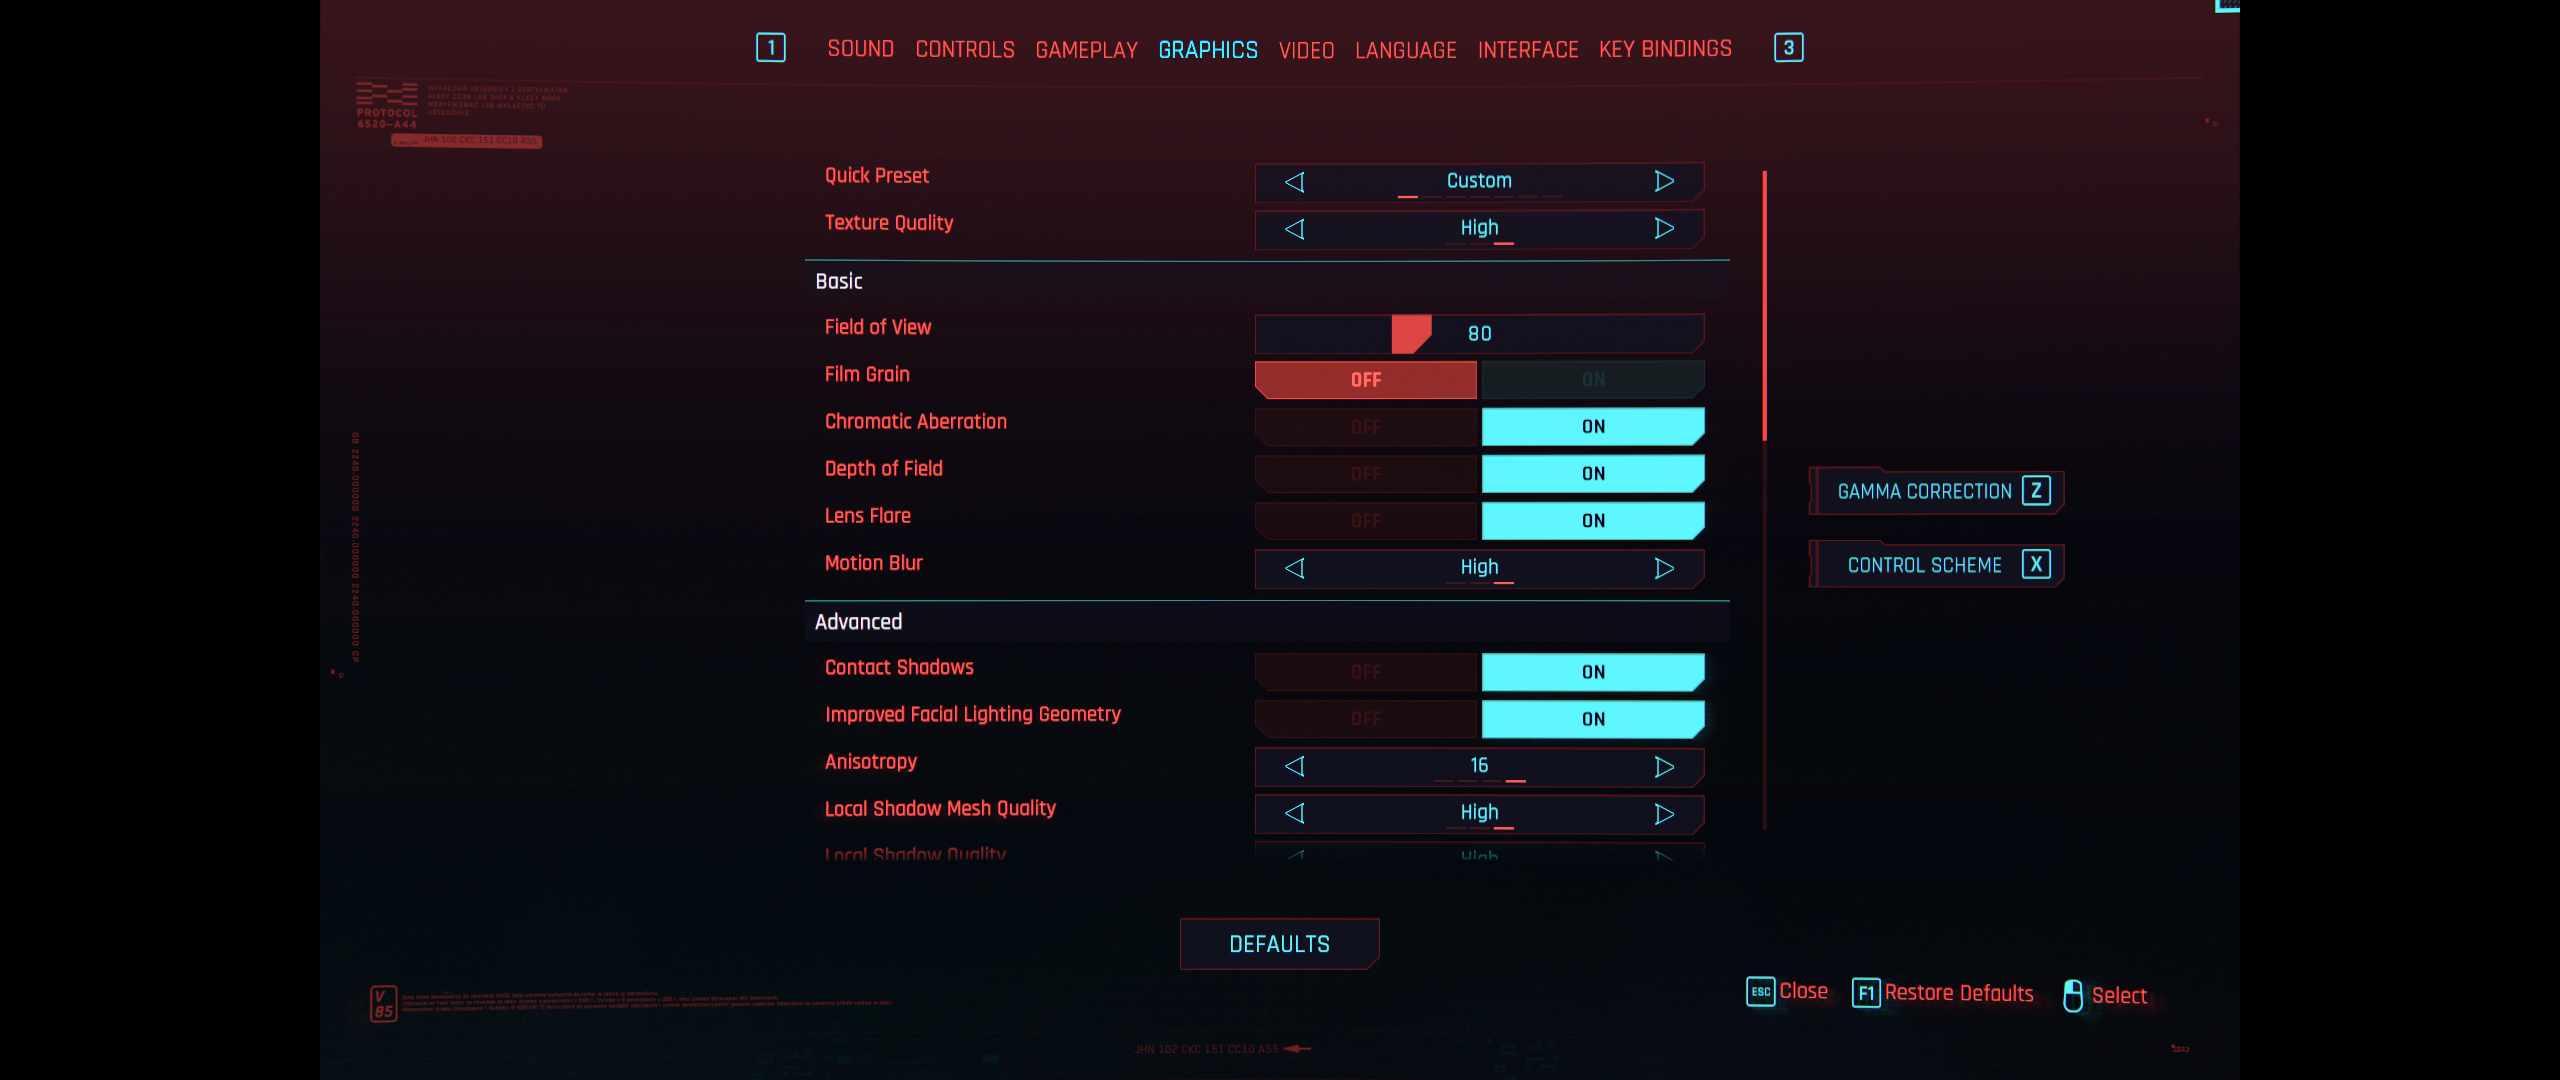 Cyberpunk 2077 Settings and Graphic Options in PC Version - picture #1